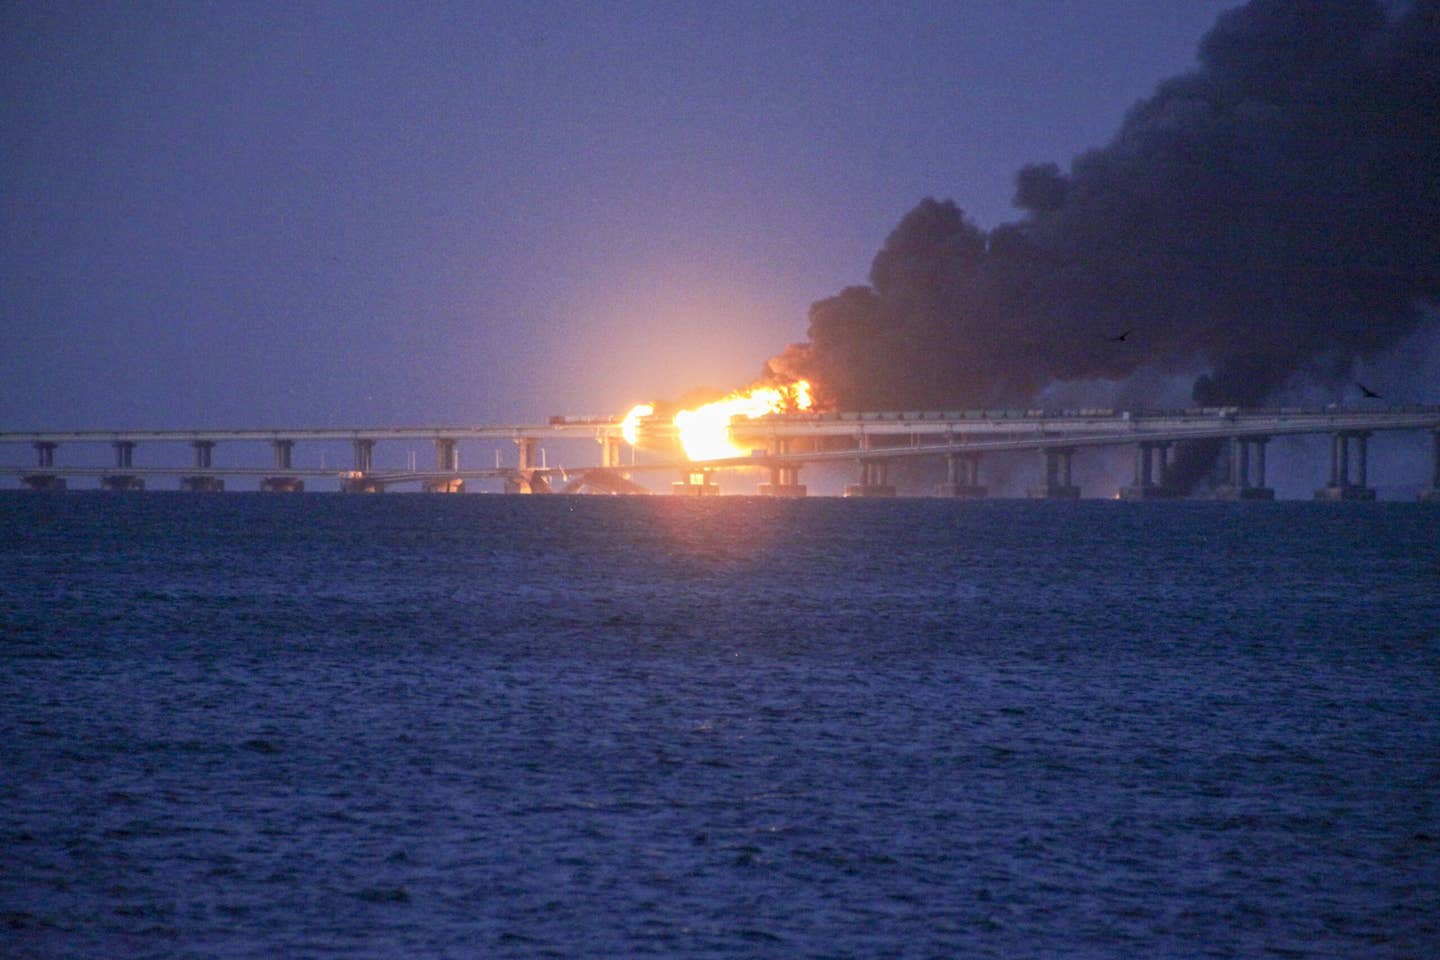 Explosion causes fire at the Kerch bridge in the Kerch Strait, Crimea on Oct. 8. (Photo by Vera Katkova/Anadolu Agency via Getty Images)